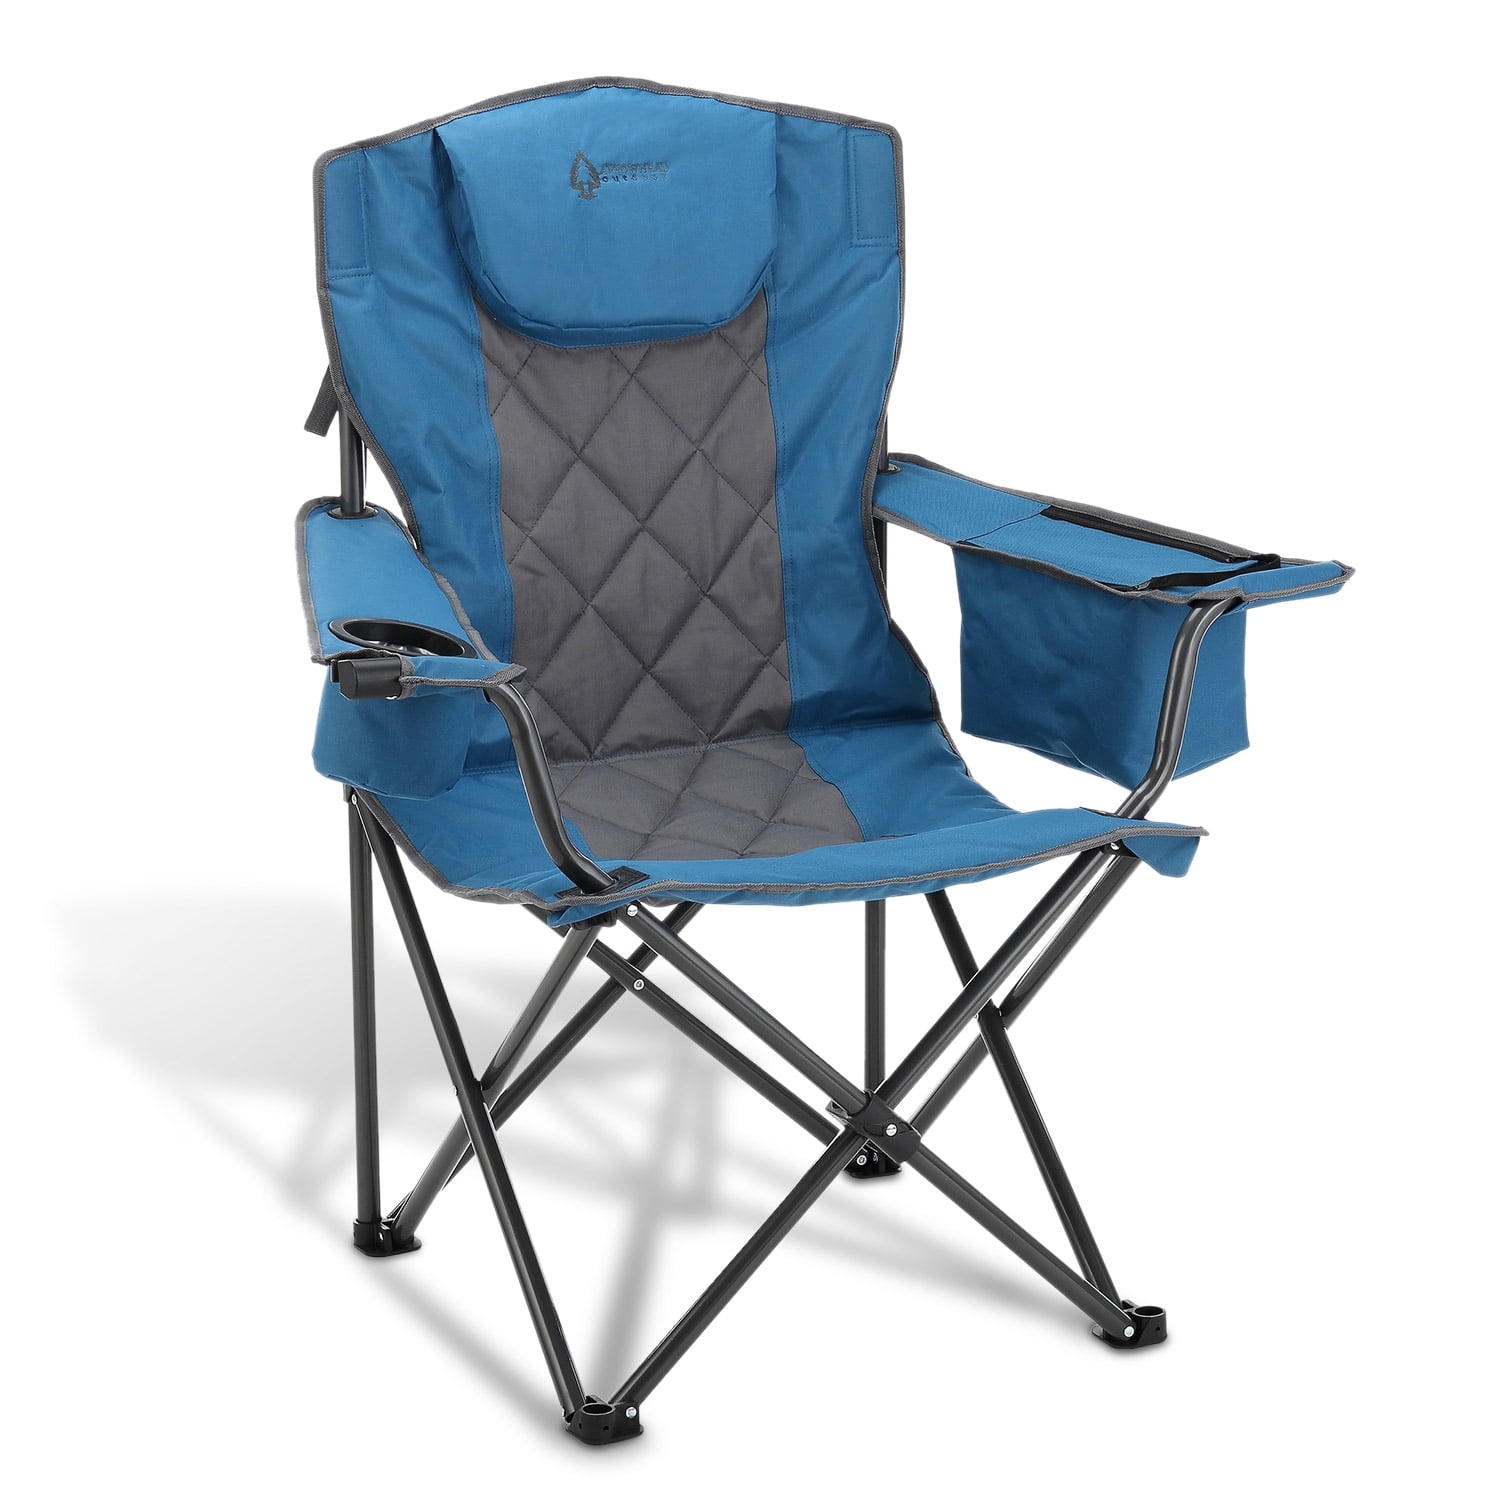 ARROWHEAD OUTDOOR Portable Folding Camping Quad Chair w/ 6-Can Cooler, Cup   Wine Glass Holders, Heavy-Duty Carrying Bag, Padded Armrests, Headrest,  Supports up to 450lbs, USA-Based Support (Green)